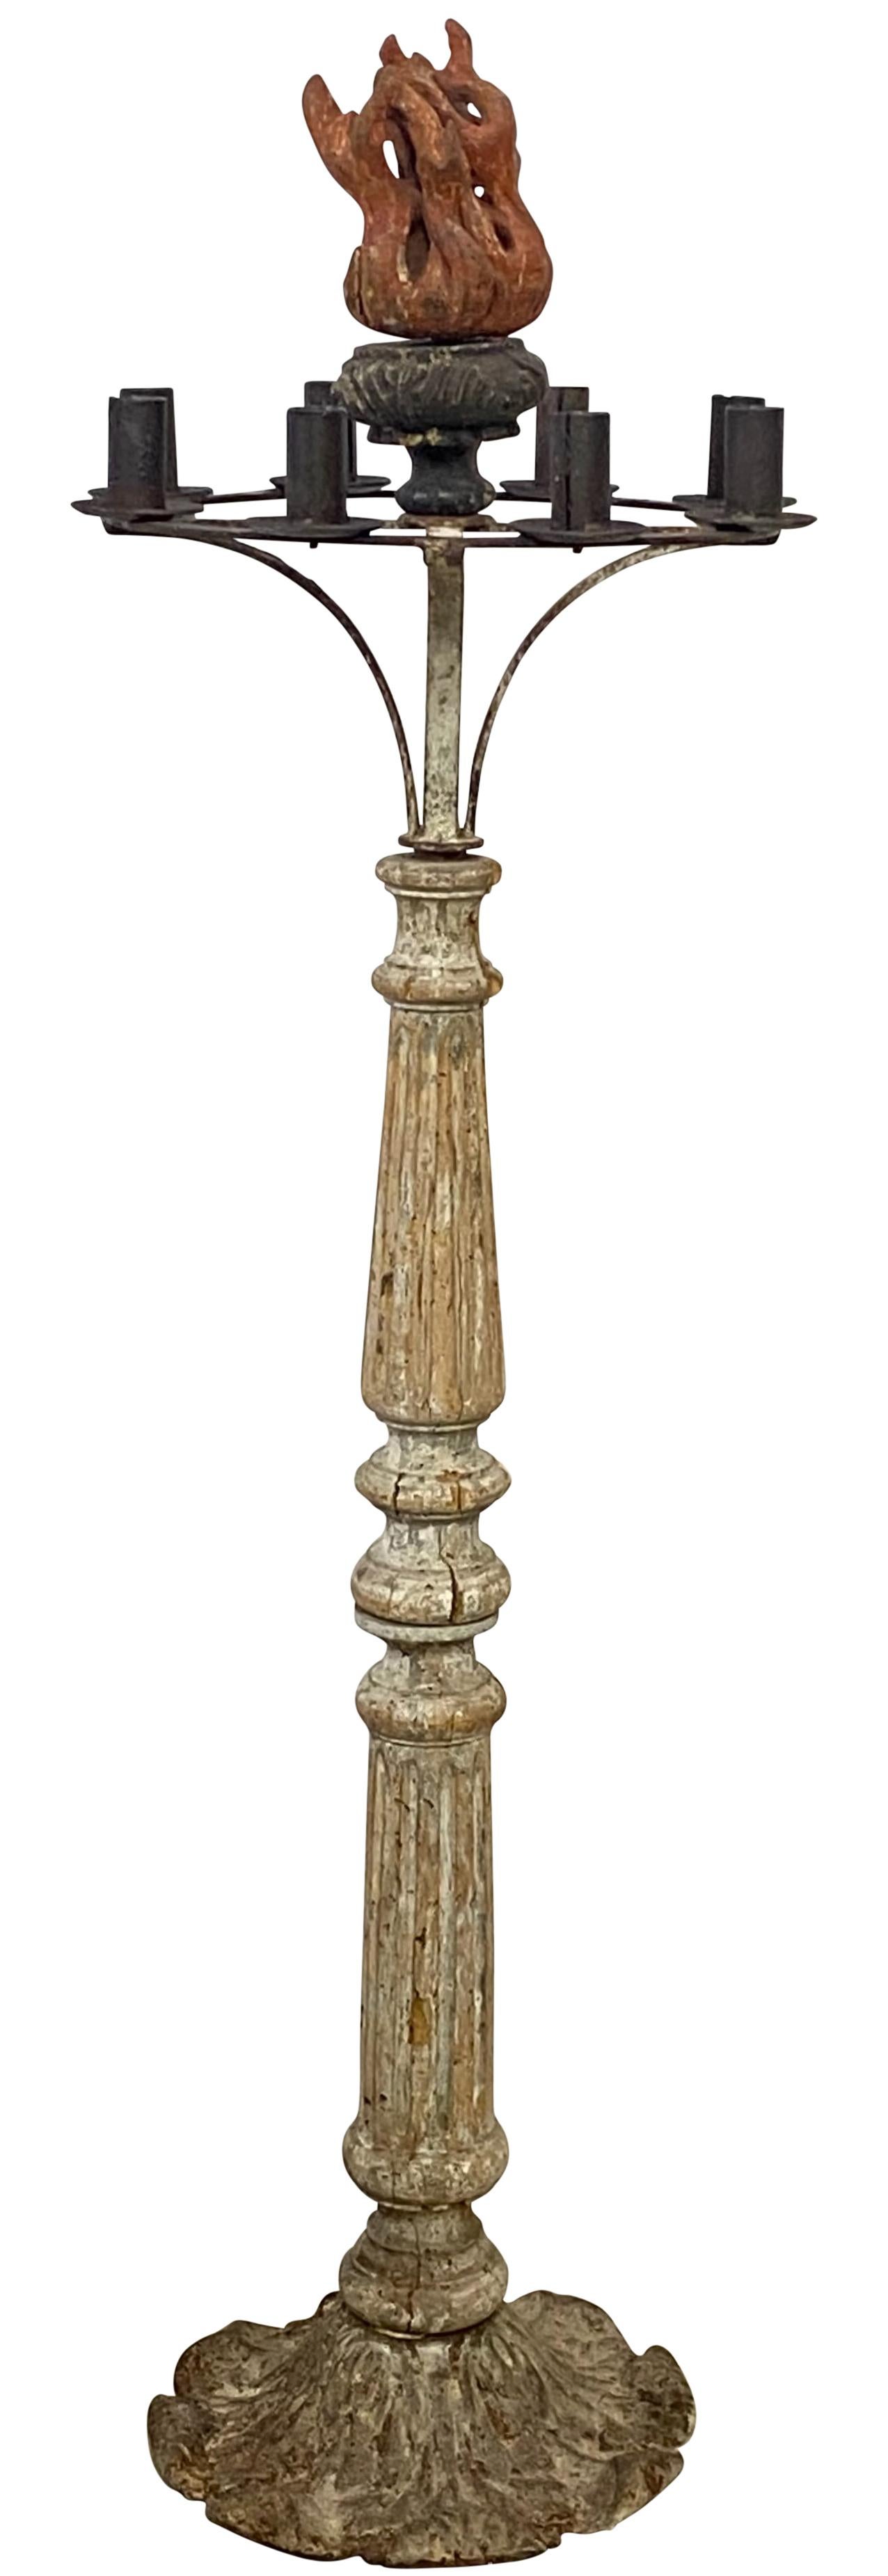 Early 18th Century Italian Carved Wood and Cast Iron Candelabra Candle Stand For Sale 2